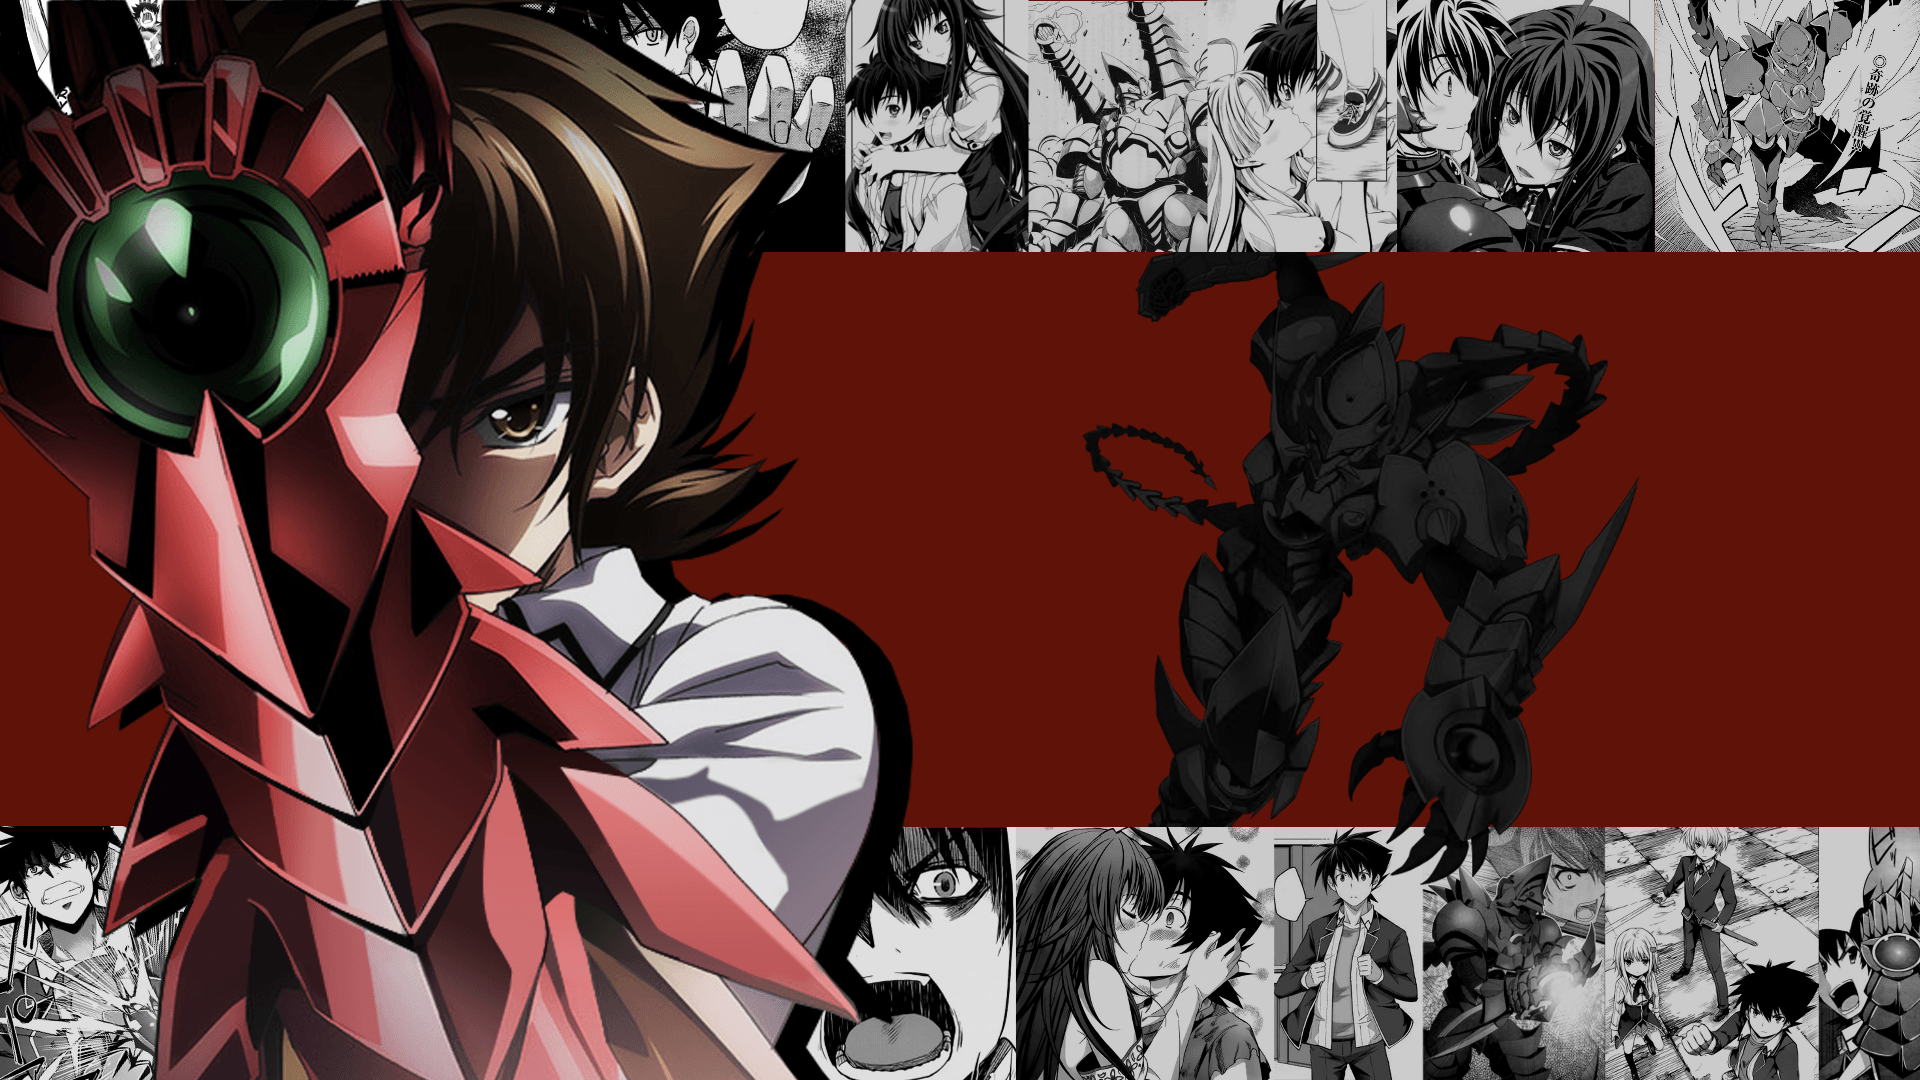 Issei Hyoudou Manga LN Wallpaper (made By Yours Truly)